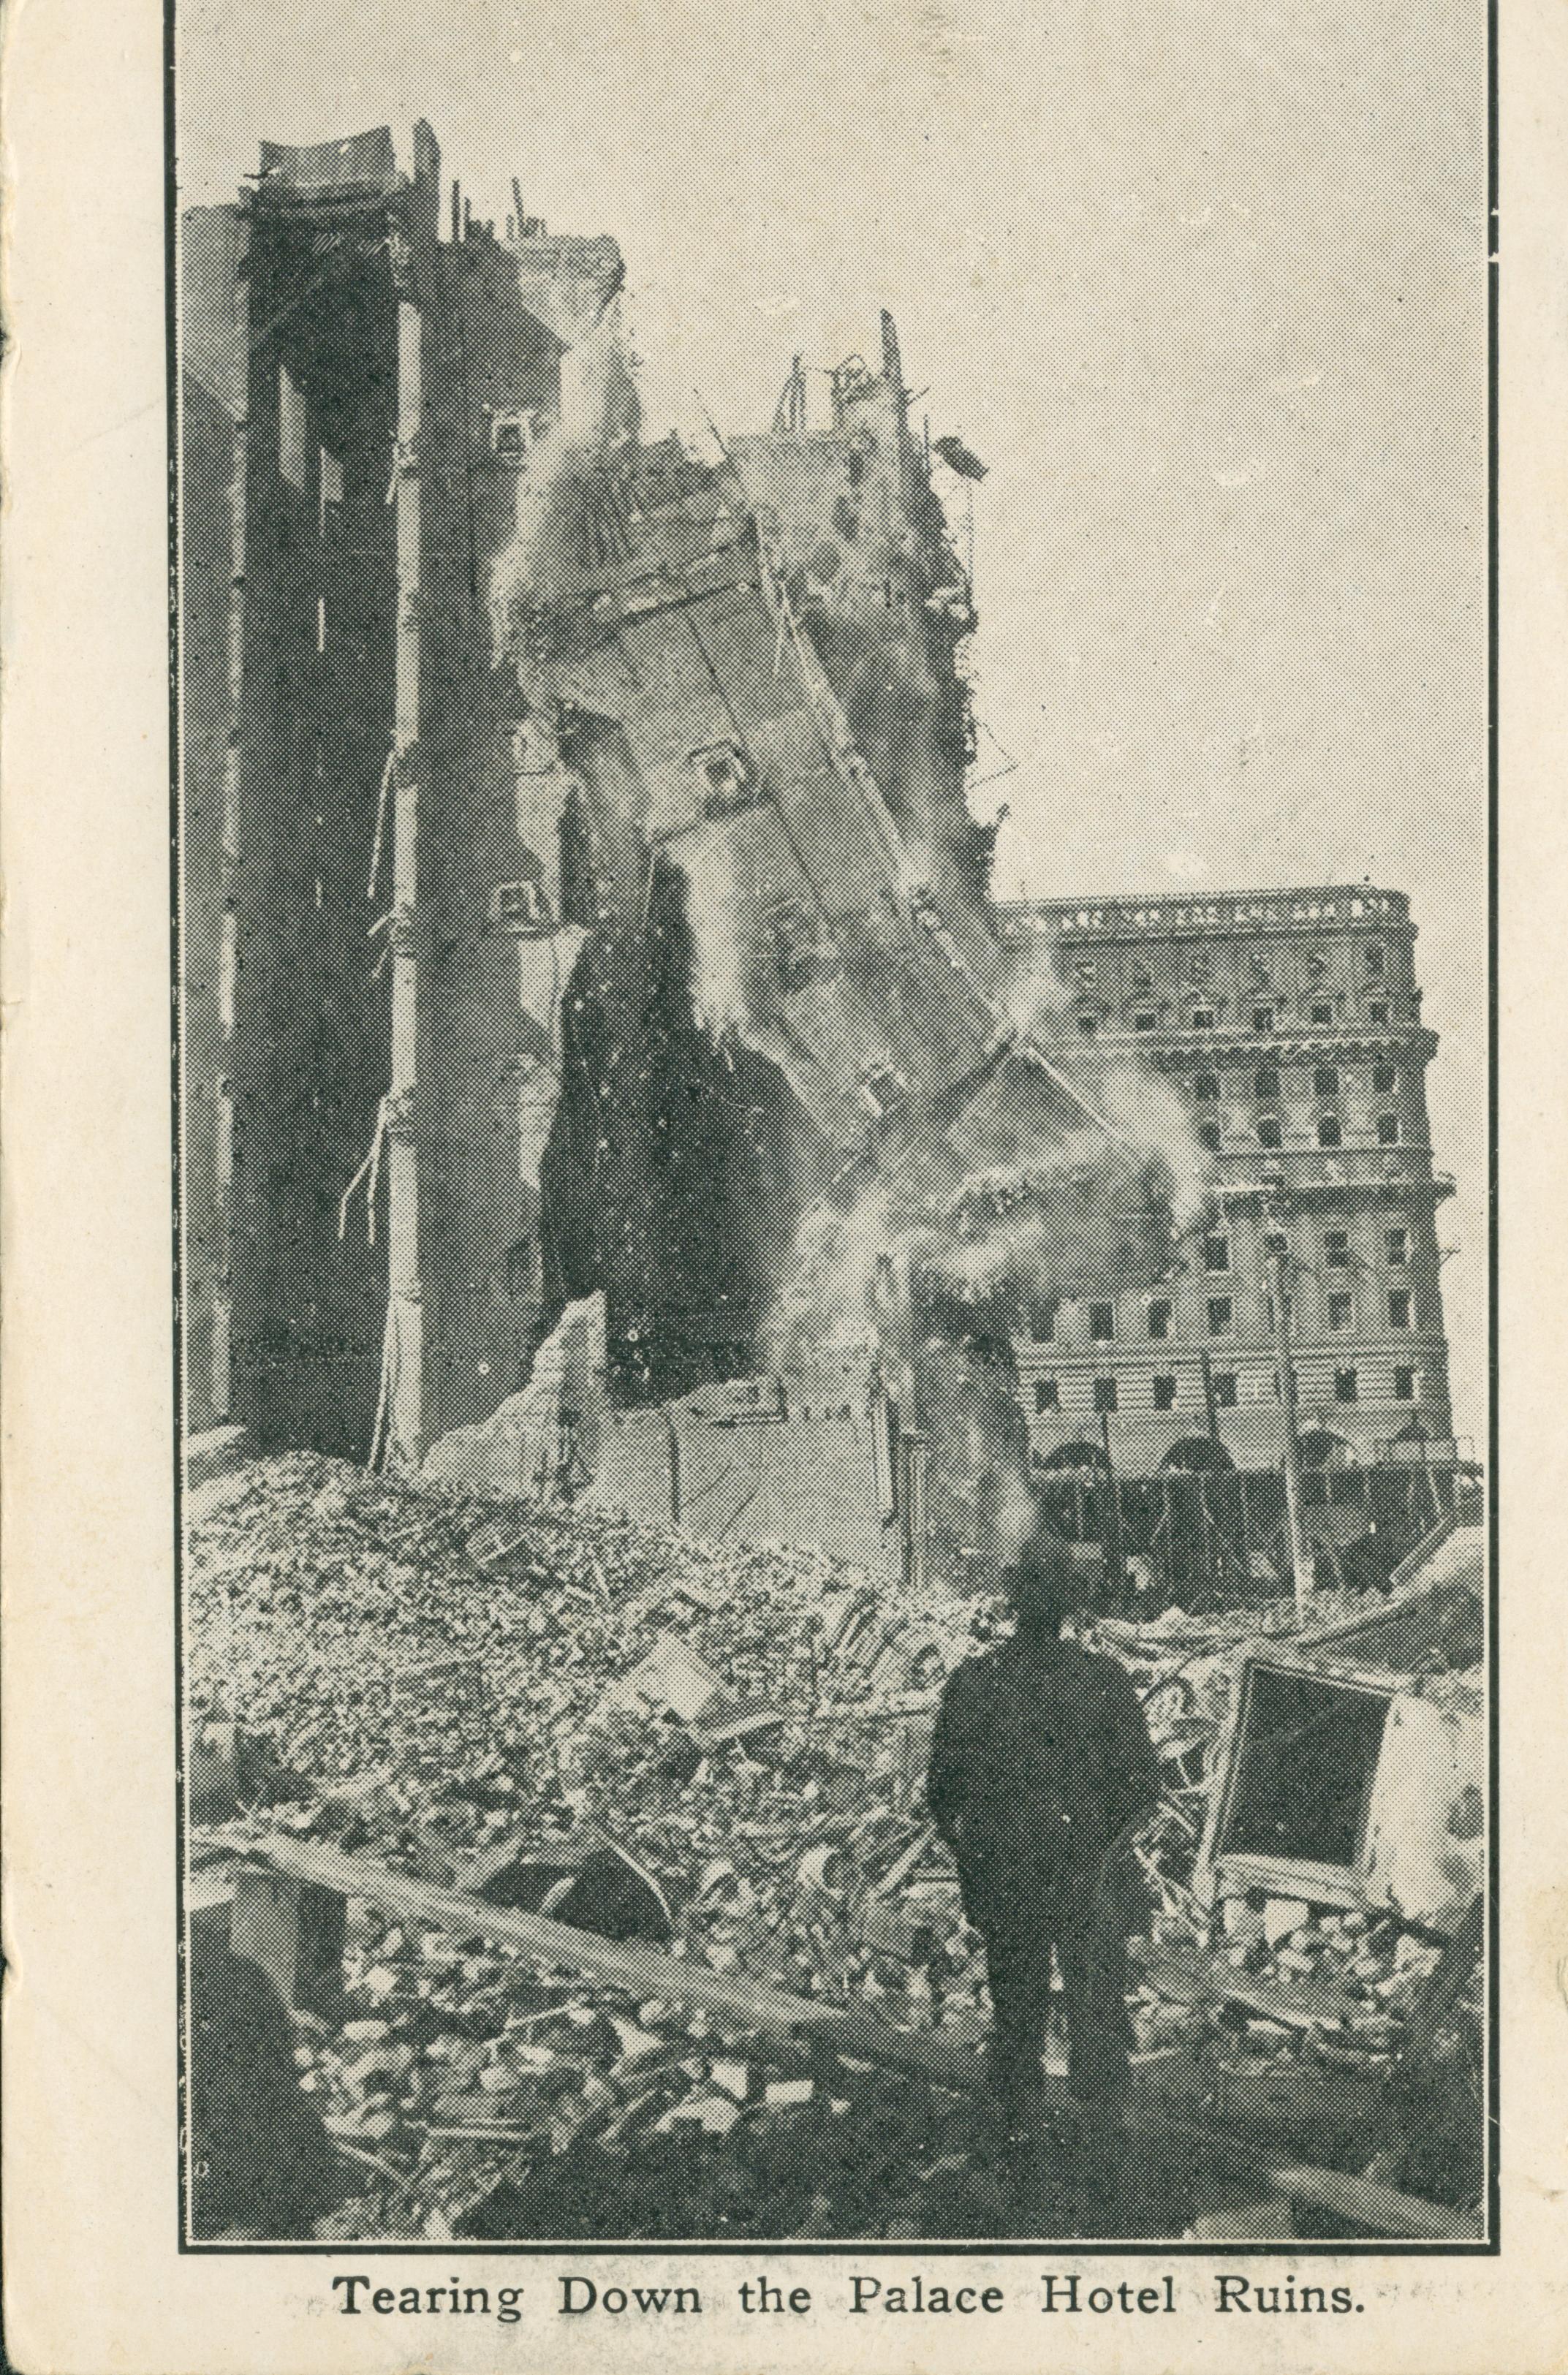 Shows the demolition of the Palace Hotel after the earthquake